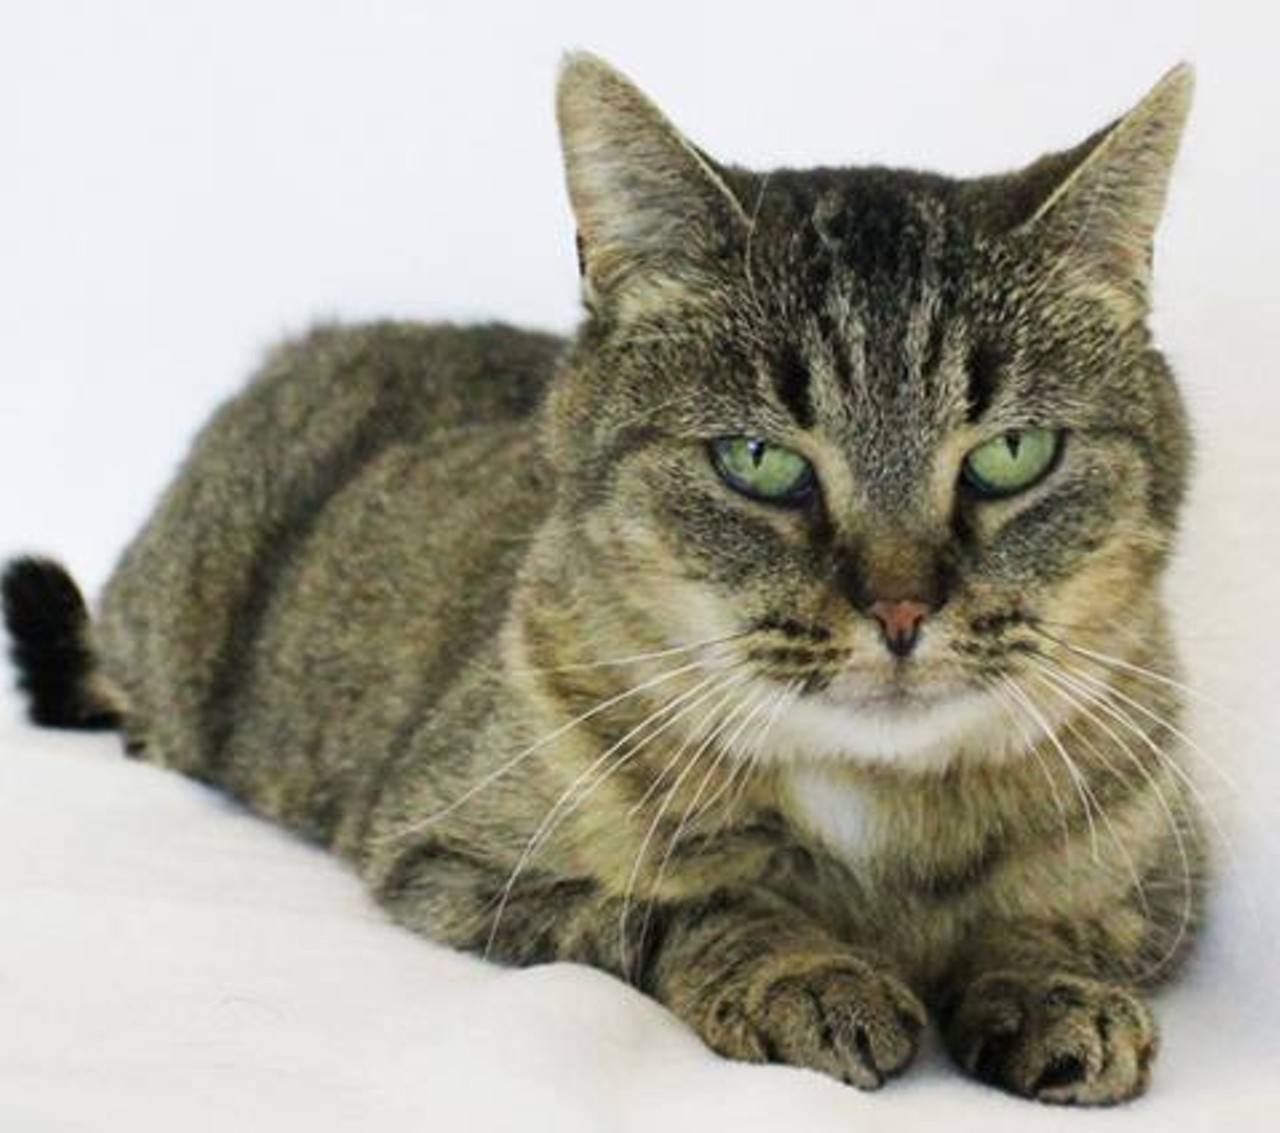 NAME: Corina
GENDER: Female
BREED: Domestic Short Hair
AGE: 10 years, 2 months
WEIGHT: 10 pounds
SPECIAL CONSIDERATIONS: None
REASON I CAME TO MHS: Owner surrender
LOCATION: Berman Center for Animal Care in Westland
ID NUMBER: 793881